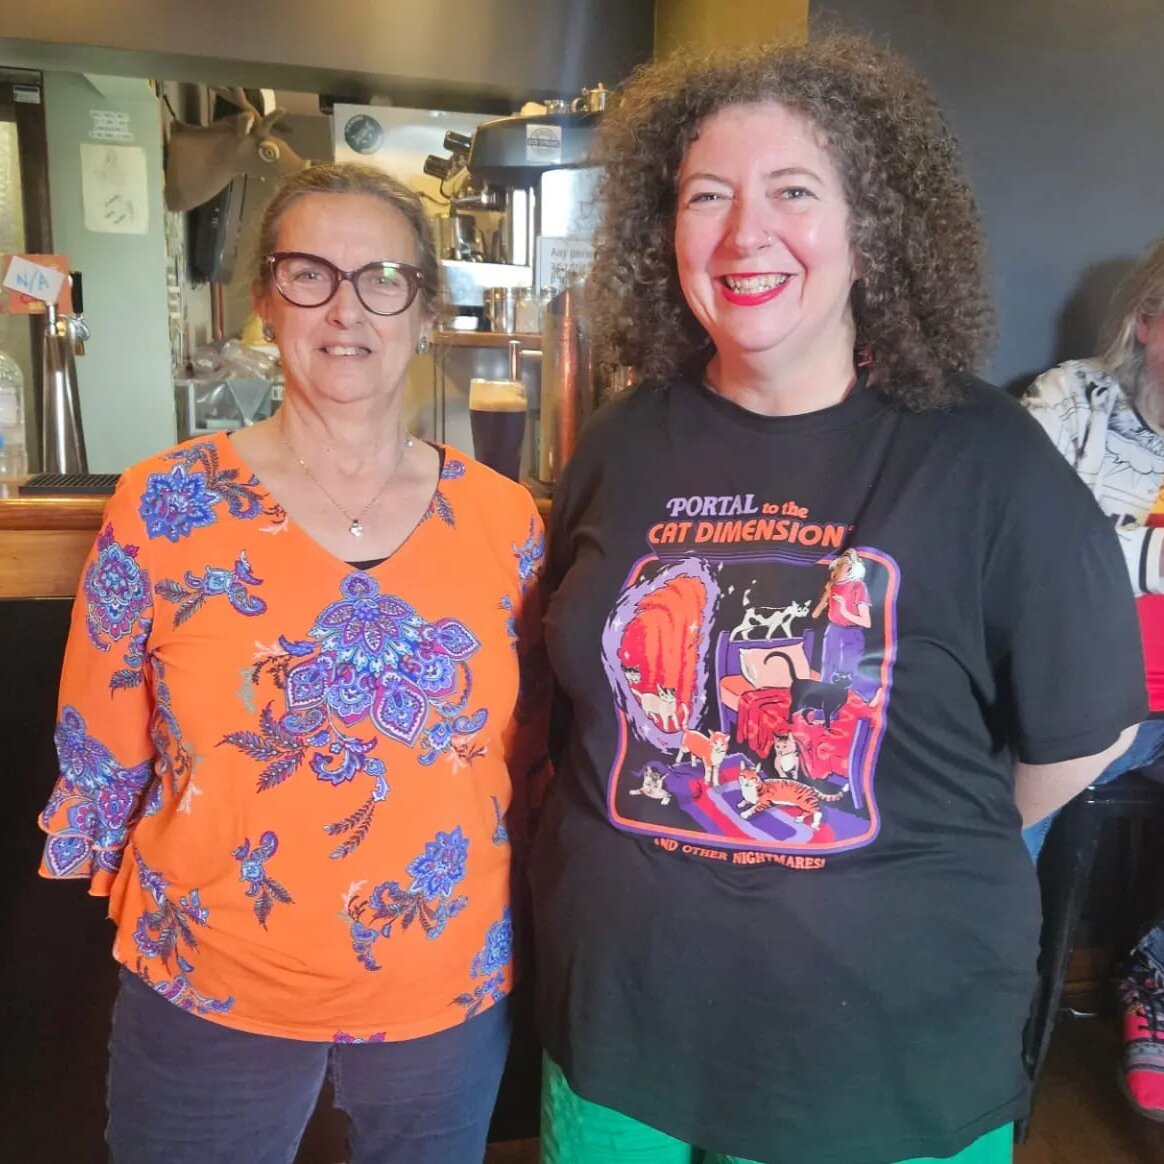 A great afternoon was had by all at &quot;Munch! Celebrating connections and diversity through food&quot; at the Gunners Arms. Great friends, food, art, readings and atmosphere. Every weekend should be this good.